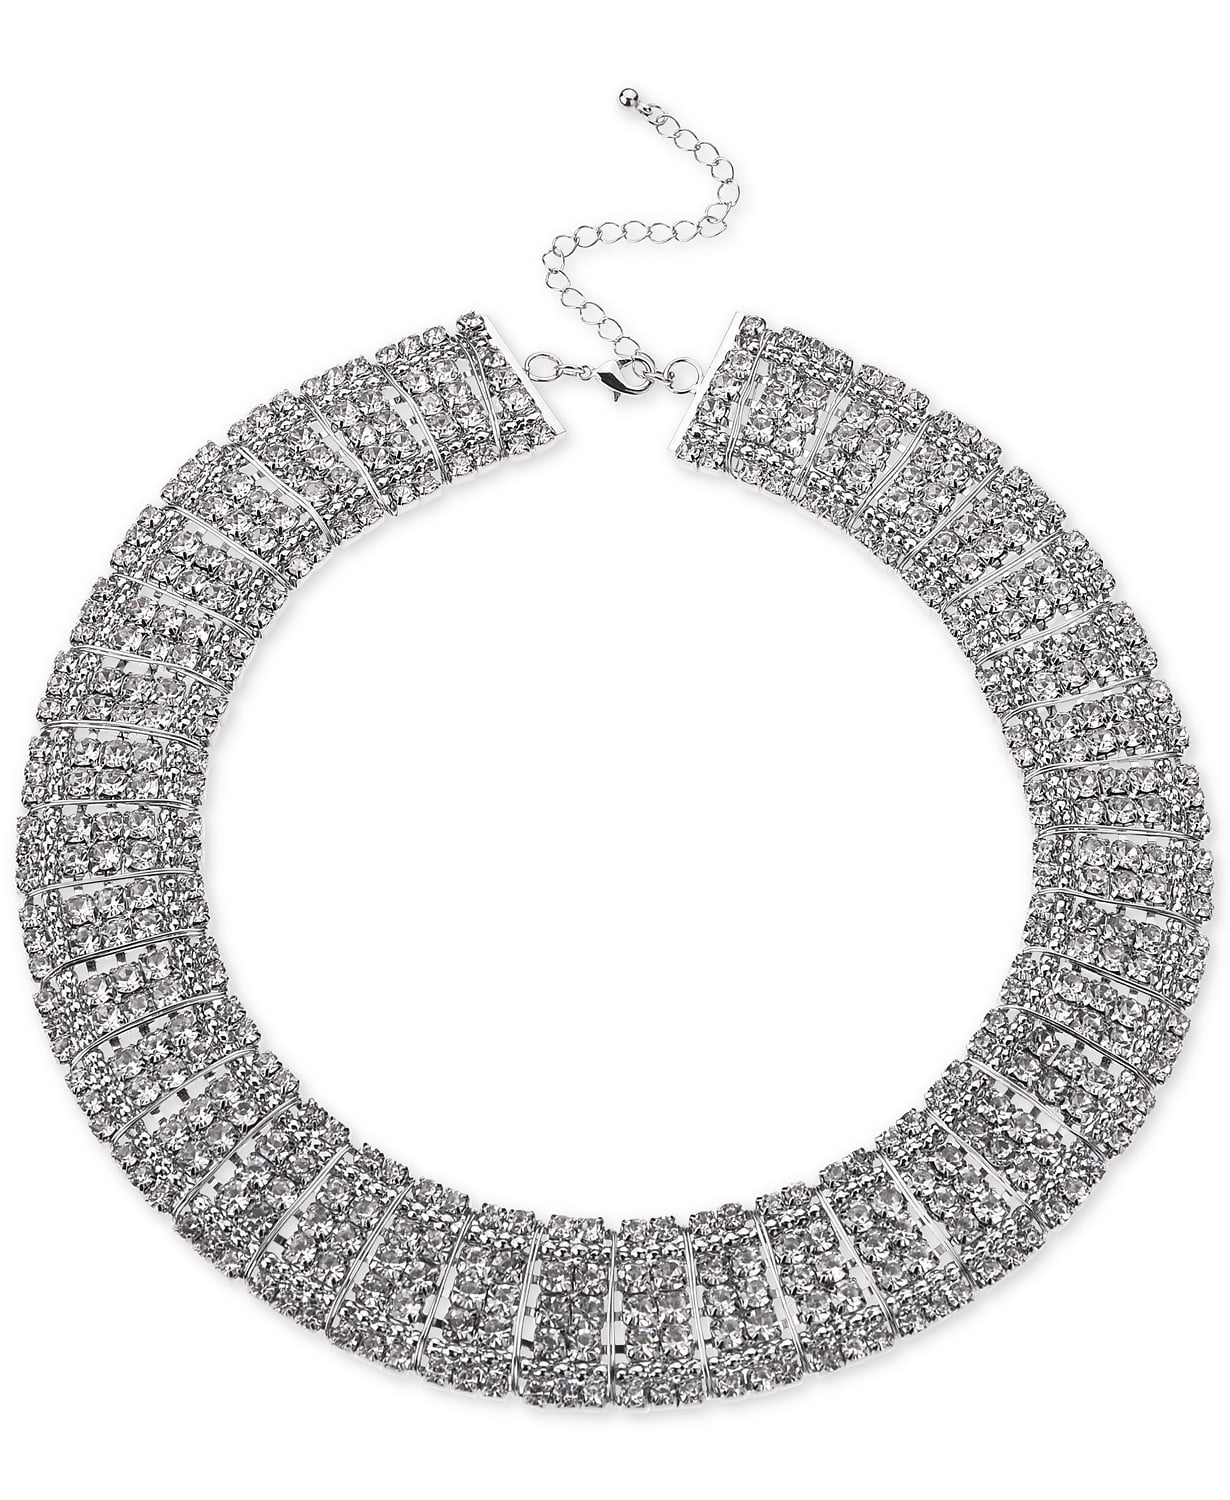 INC International Concepts Silver-Tone Crystal Multi-Row Choker Necklace ($30)